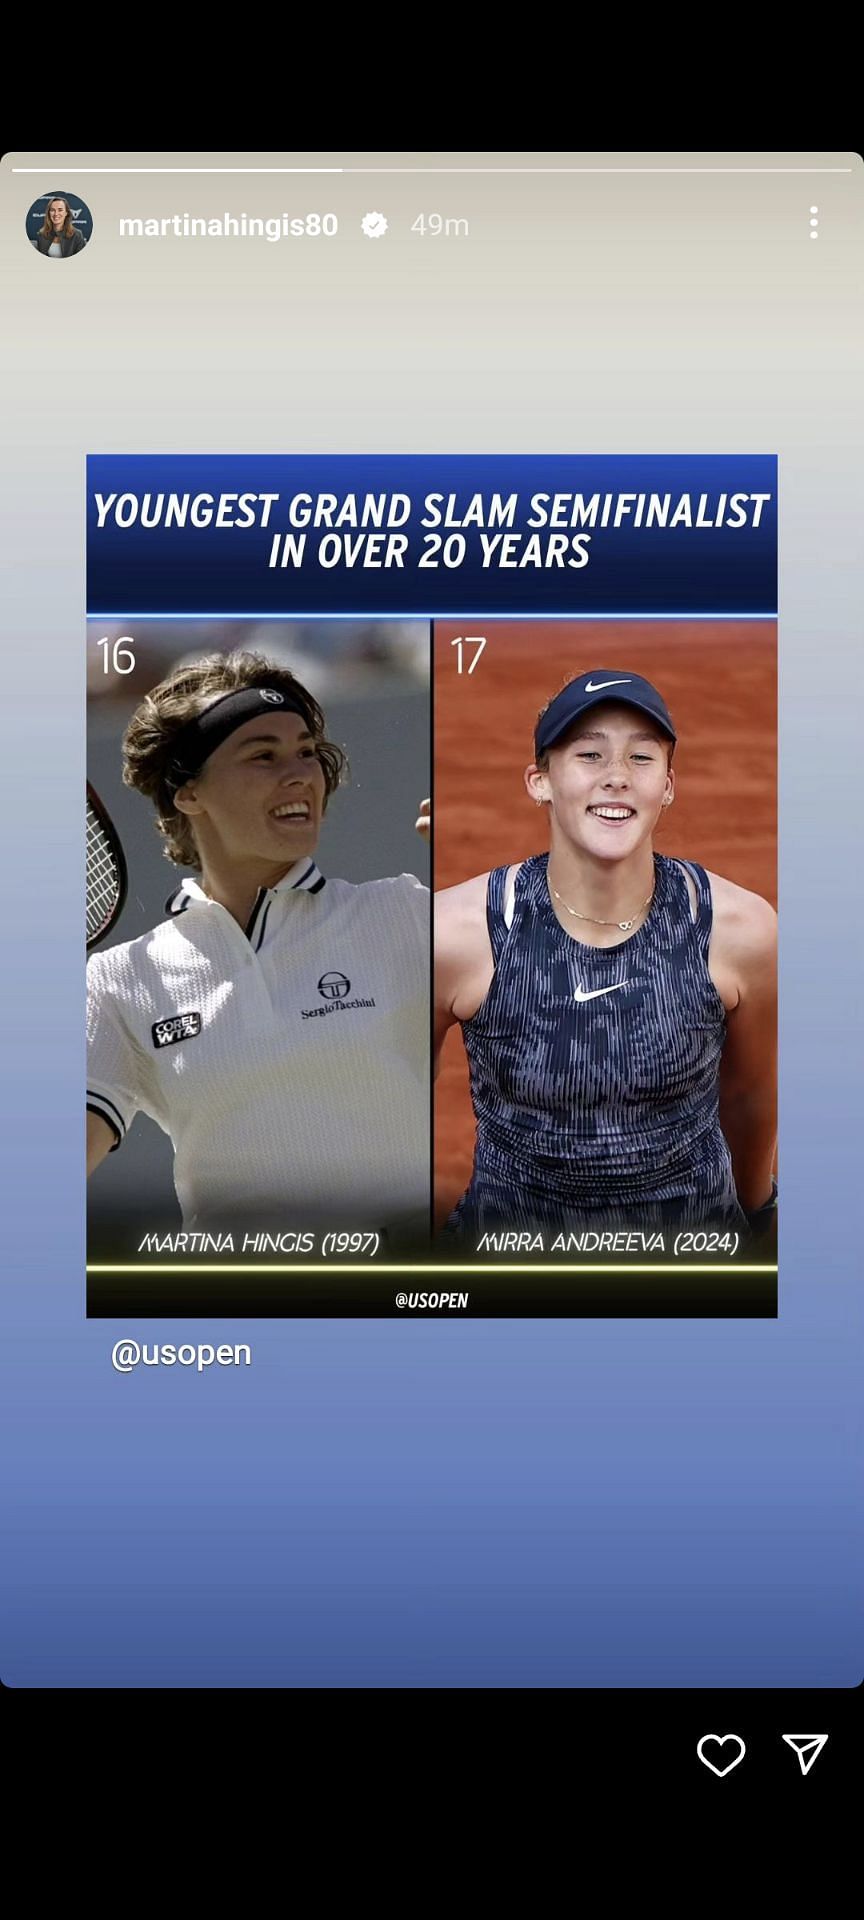 Martina Hingis&#039; Instagram Story acknowledging Mirra Andreeva&#039;s win over Aryna Sabalenka in the 2024 French Open quarterfinals